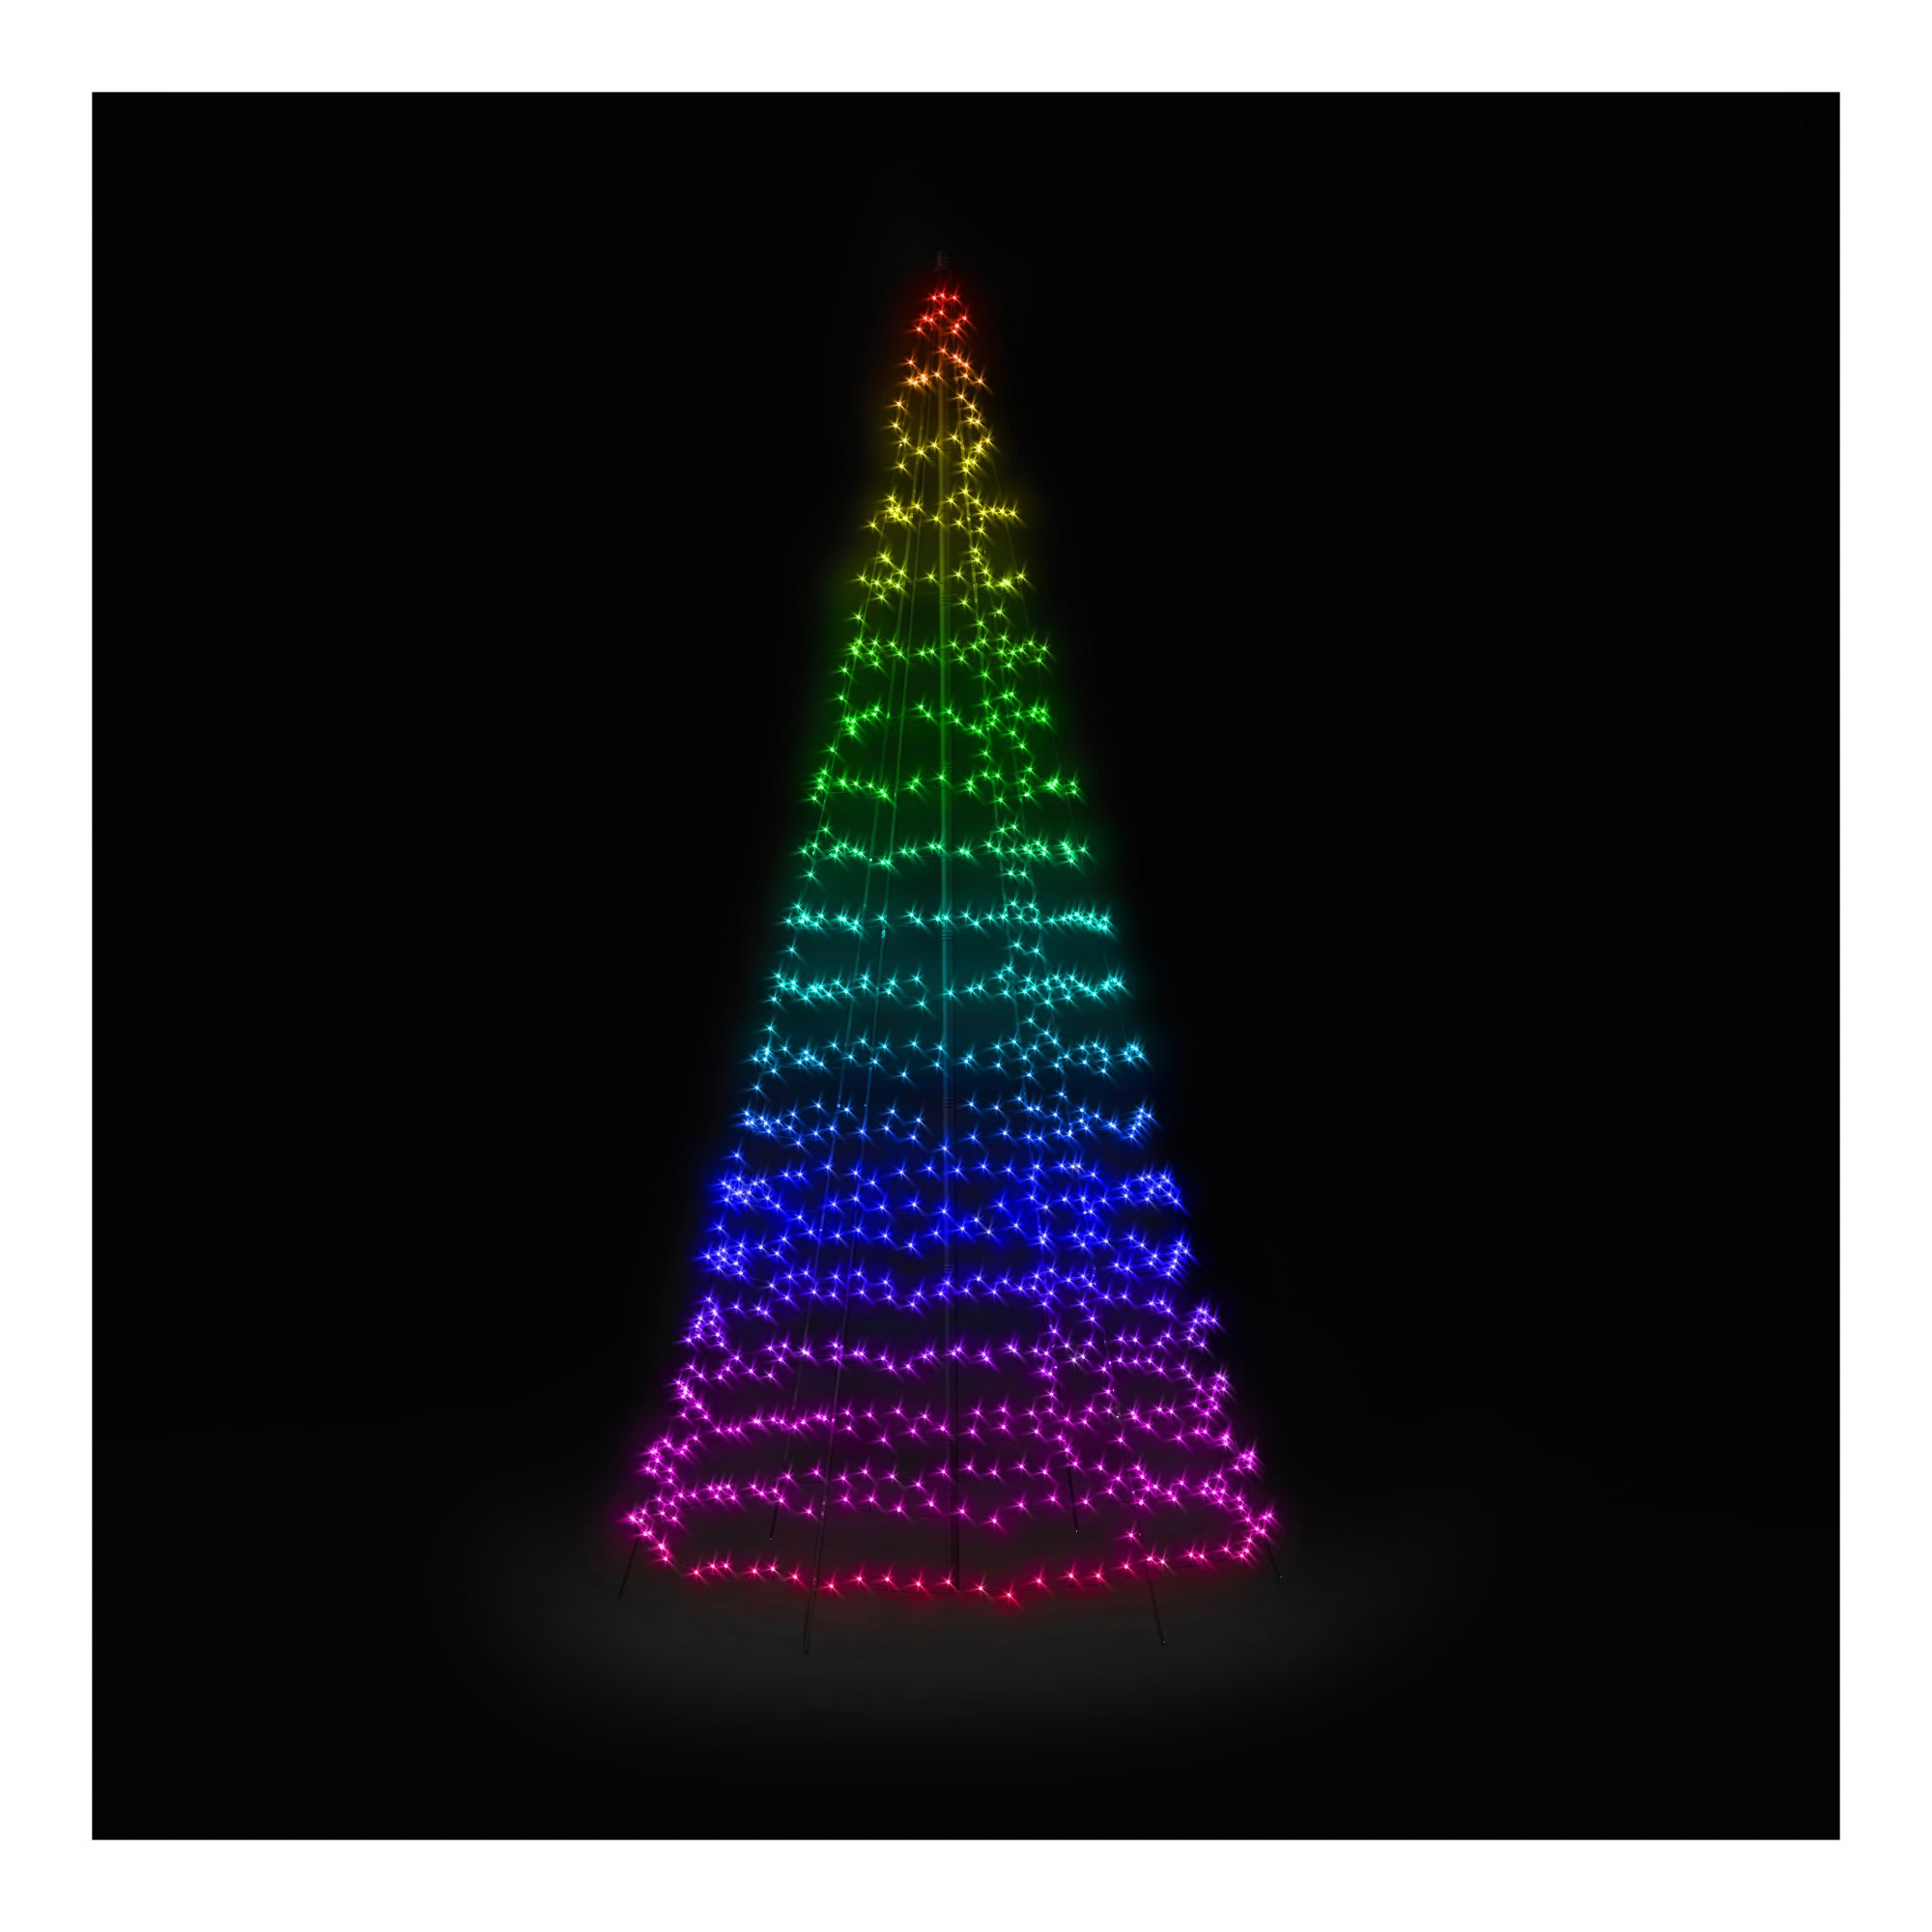 Twinkly 13' App-Enabled Light Tree with 750 RGB+W LED Lights